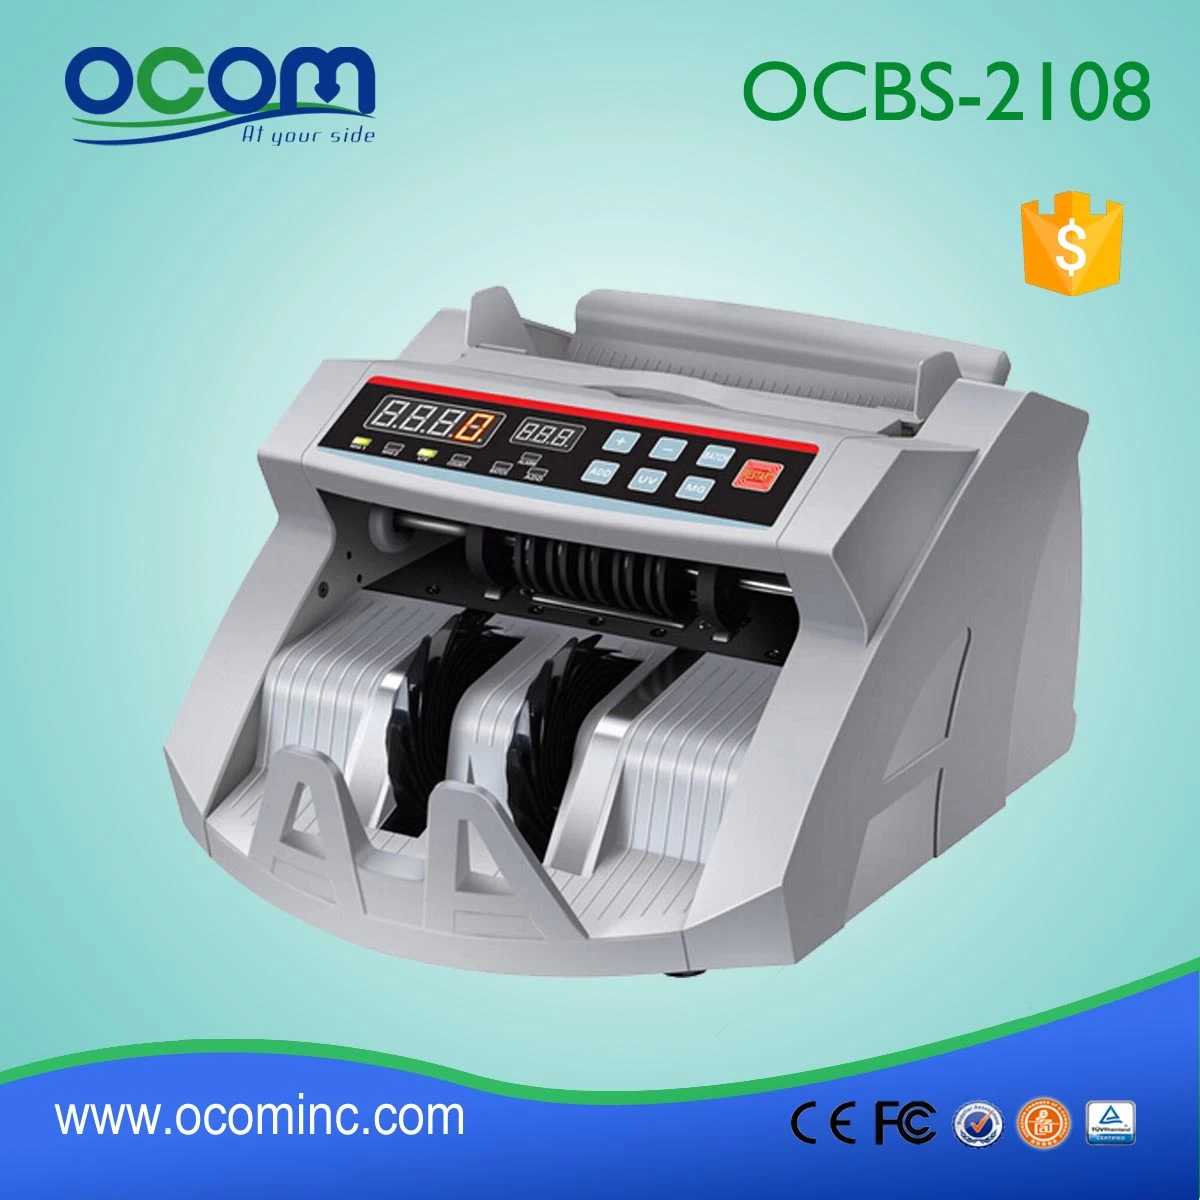 OCBC-2108 Cash Note Counting Currency Machine